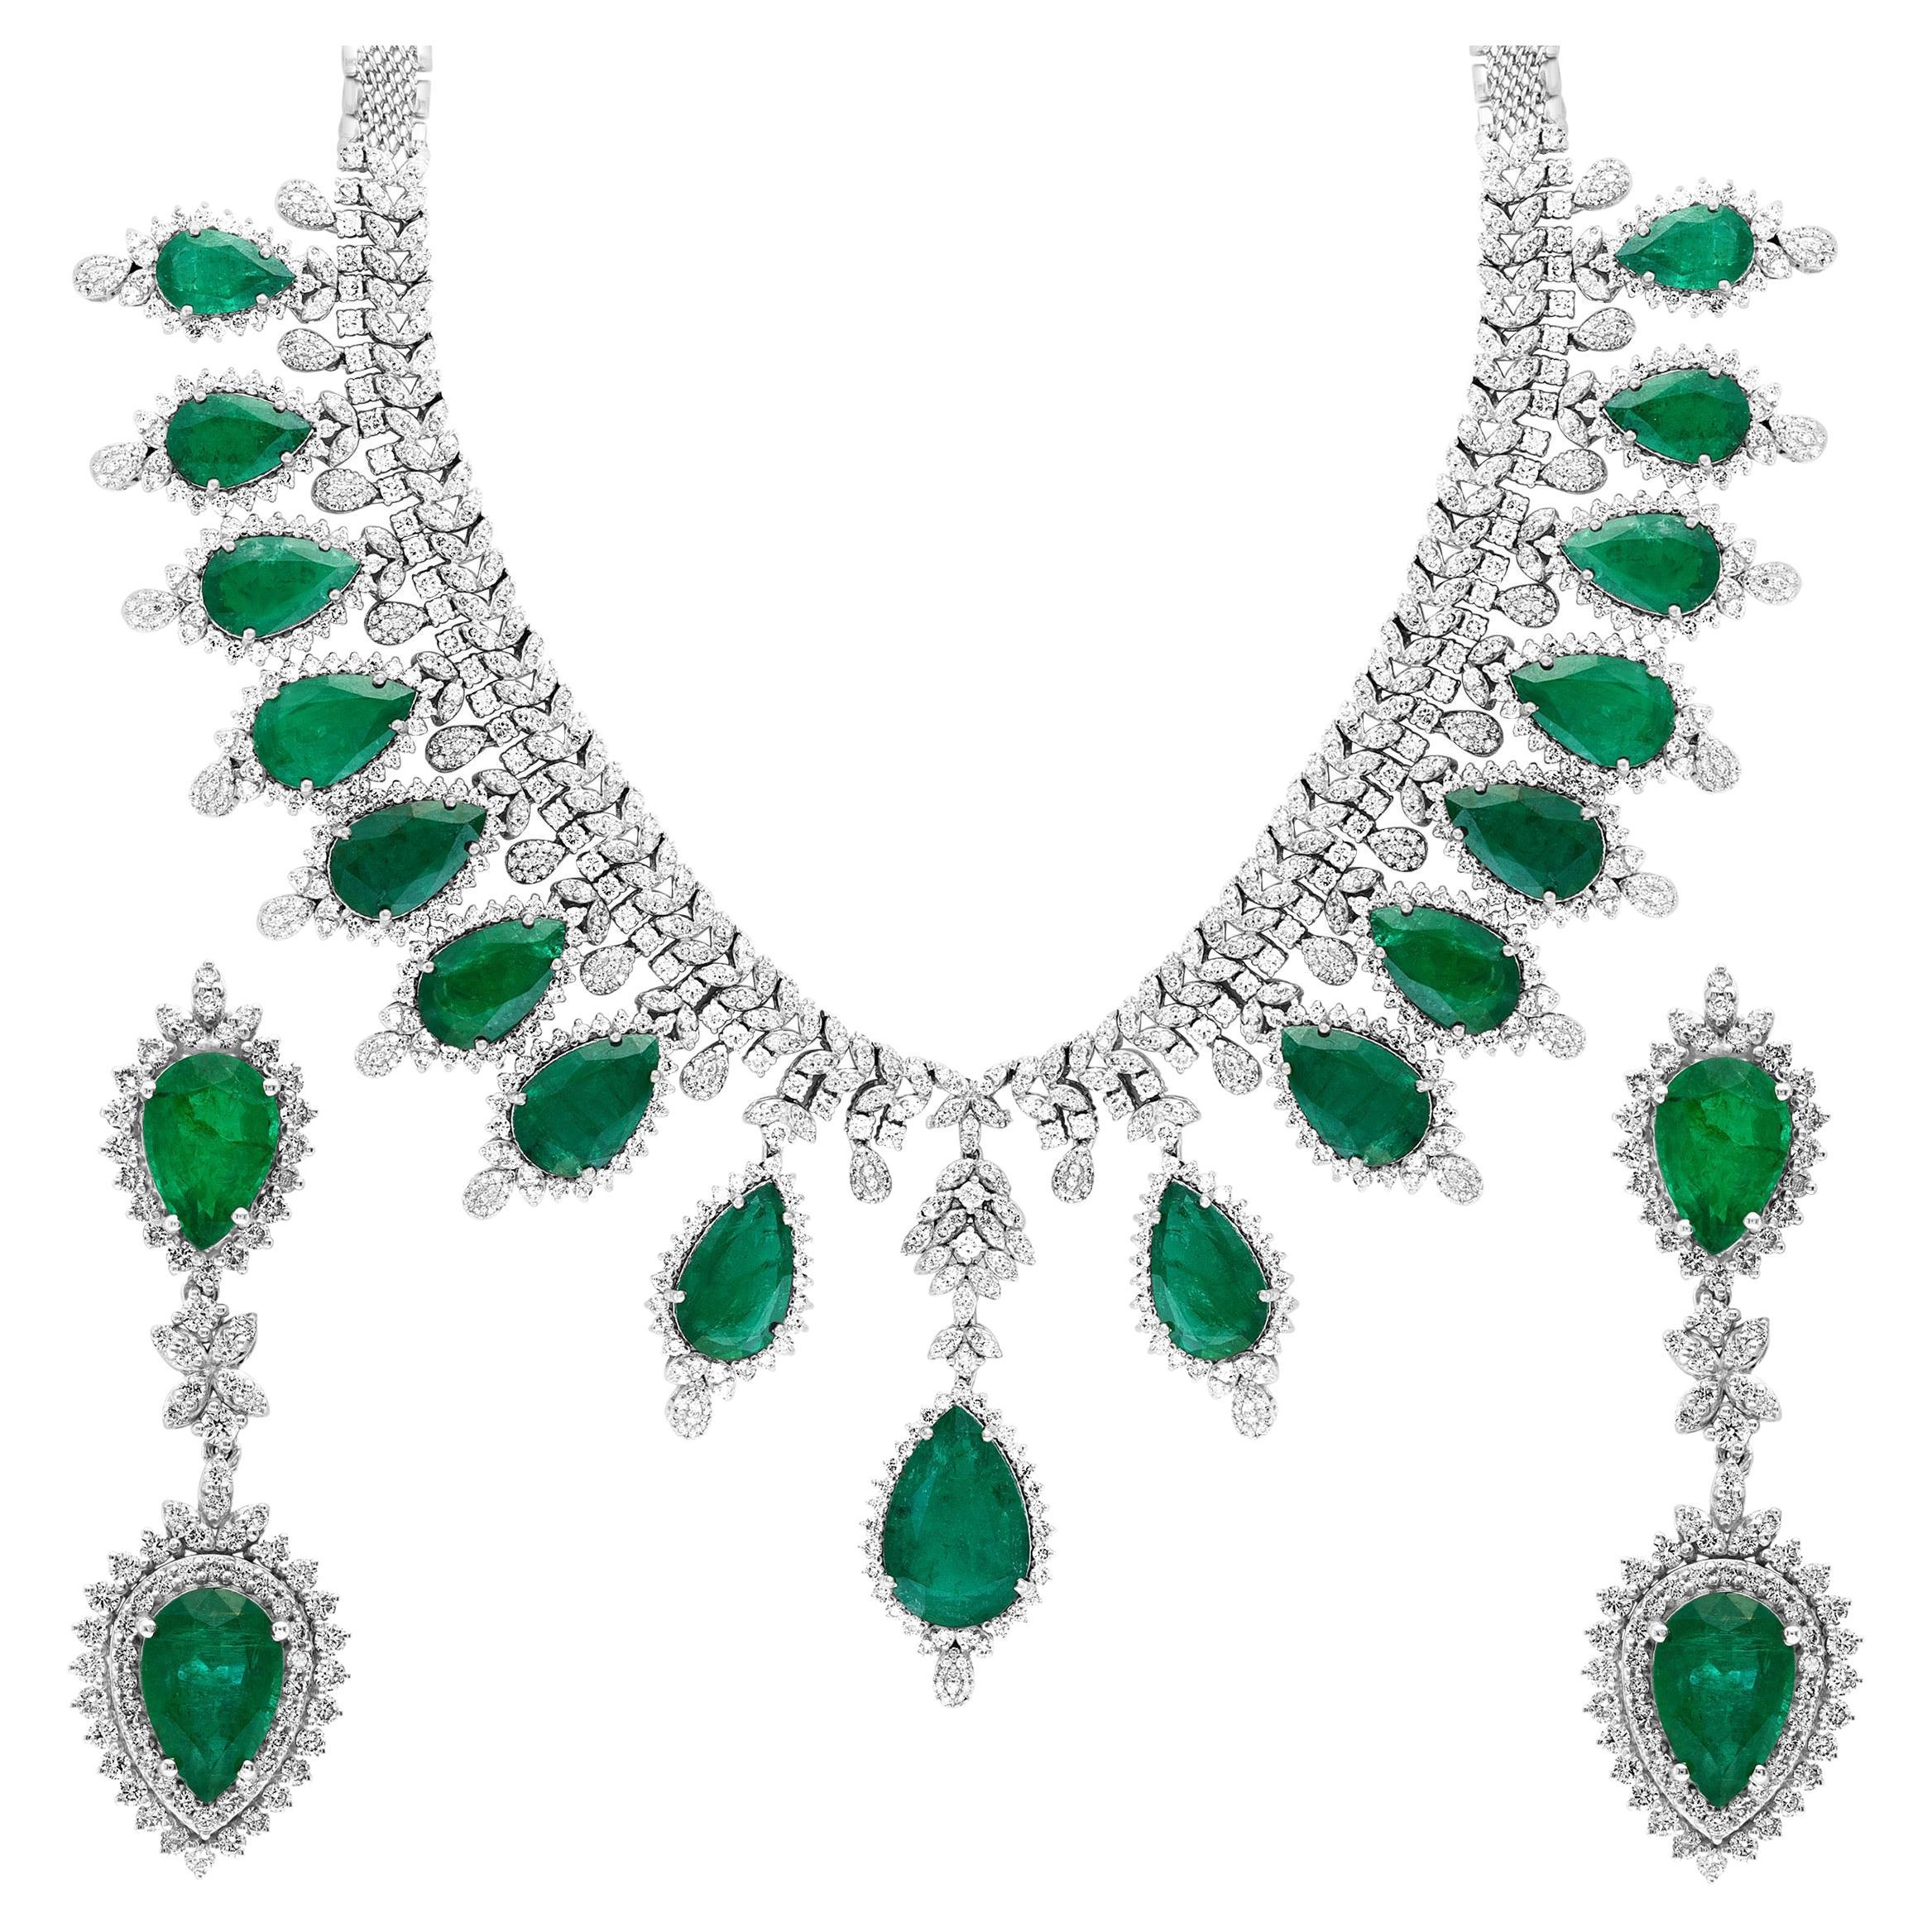 73ct Zambian Emerald and 22ct Diamond Necklace and Earring Bridal Suite